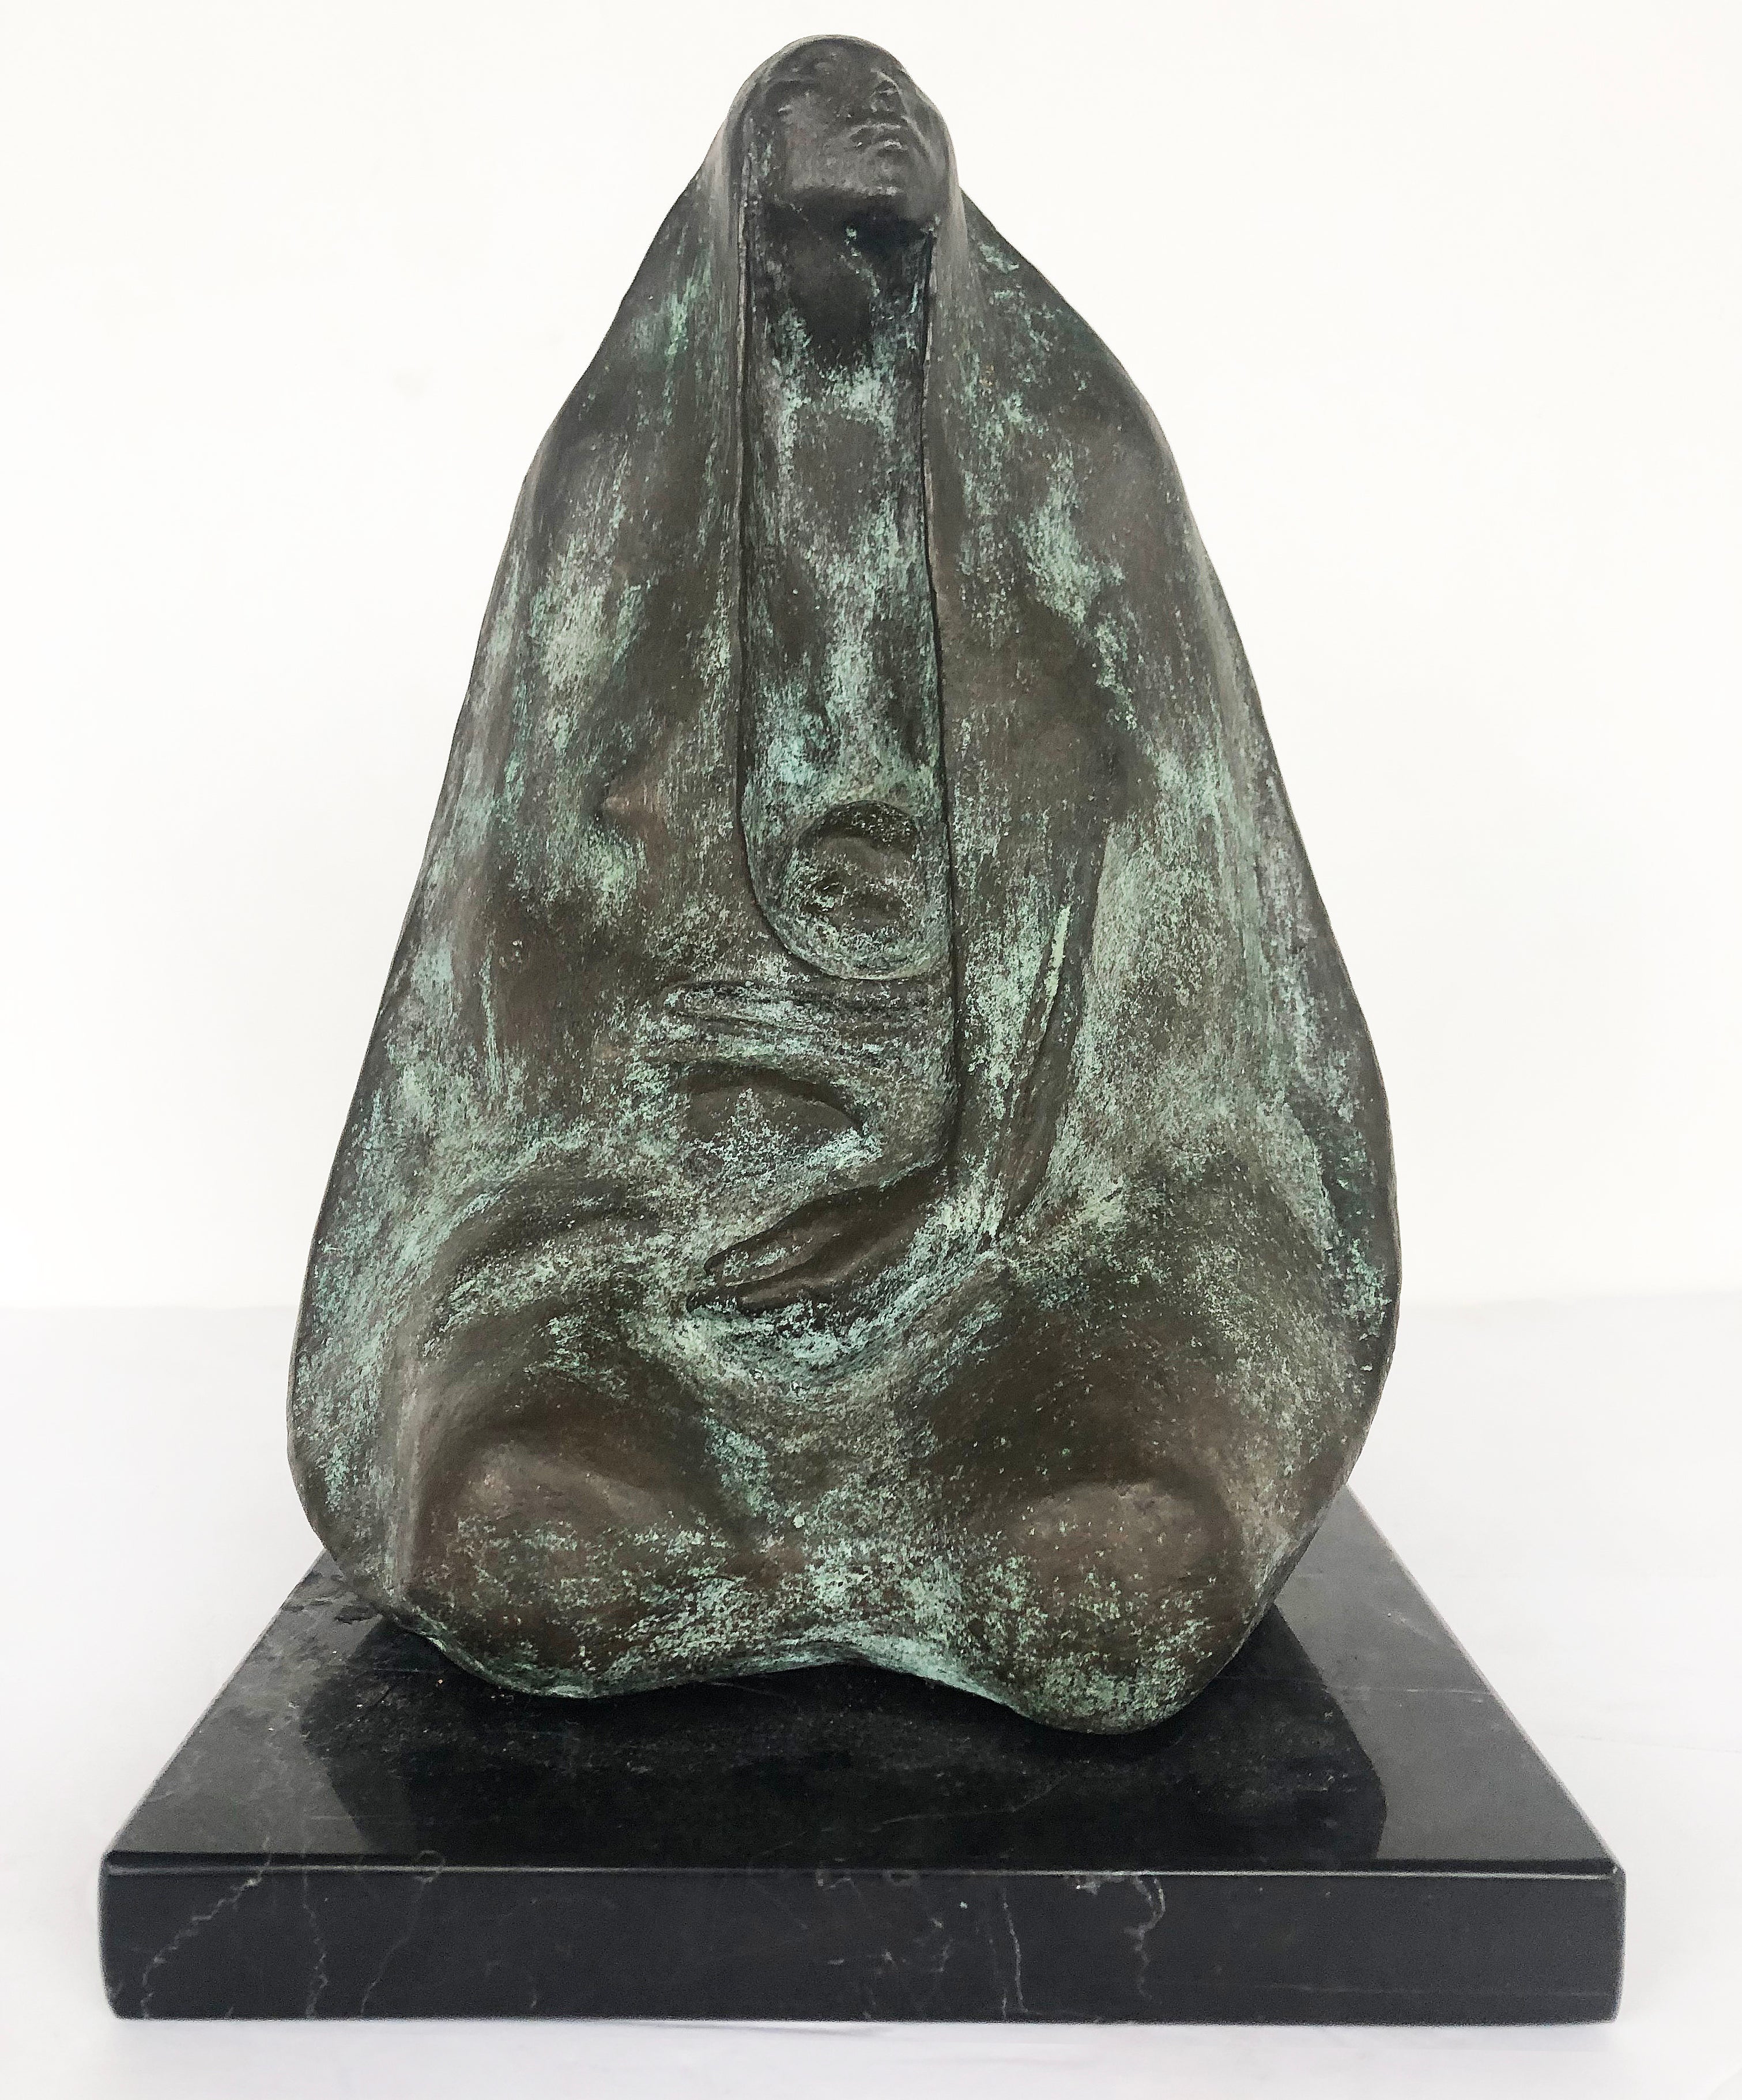 Francisco Zúñiga Bronze Patinated Sculpture on Marble Base

Offered for sale is an original Francisco Zúñiga (1912 - 1998) bronze sculpture with a green patina depicting a mother and child. The sculpture is raised on a square marble base and is